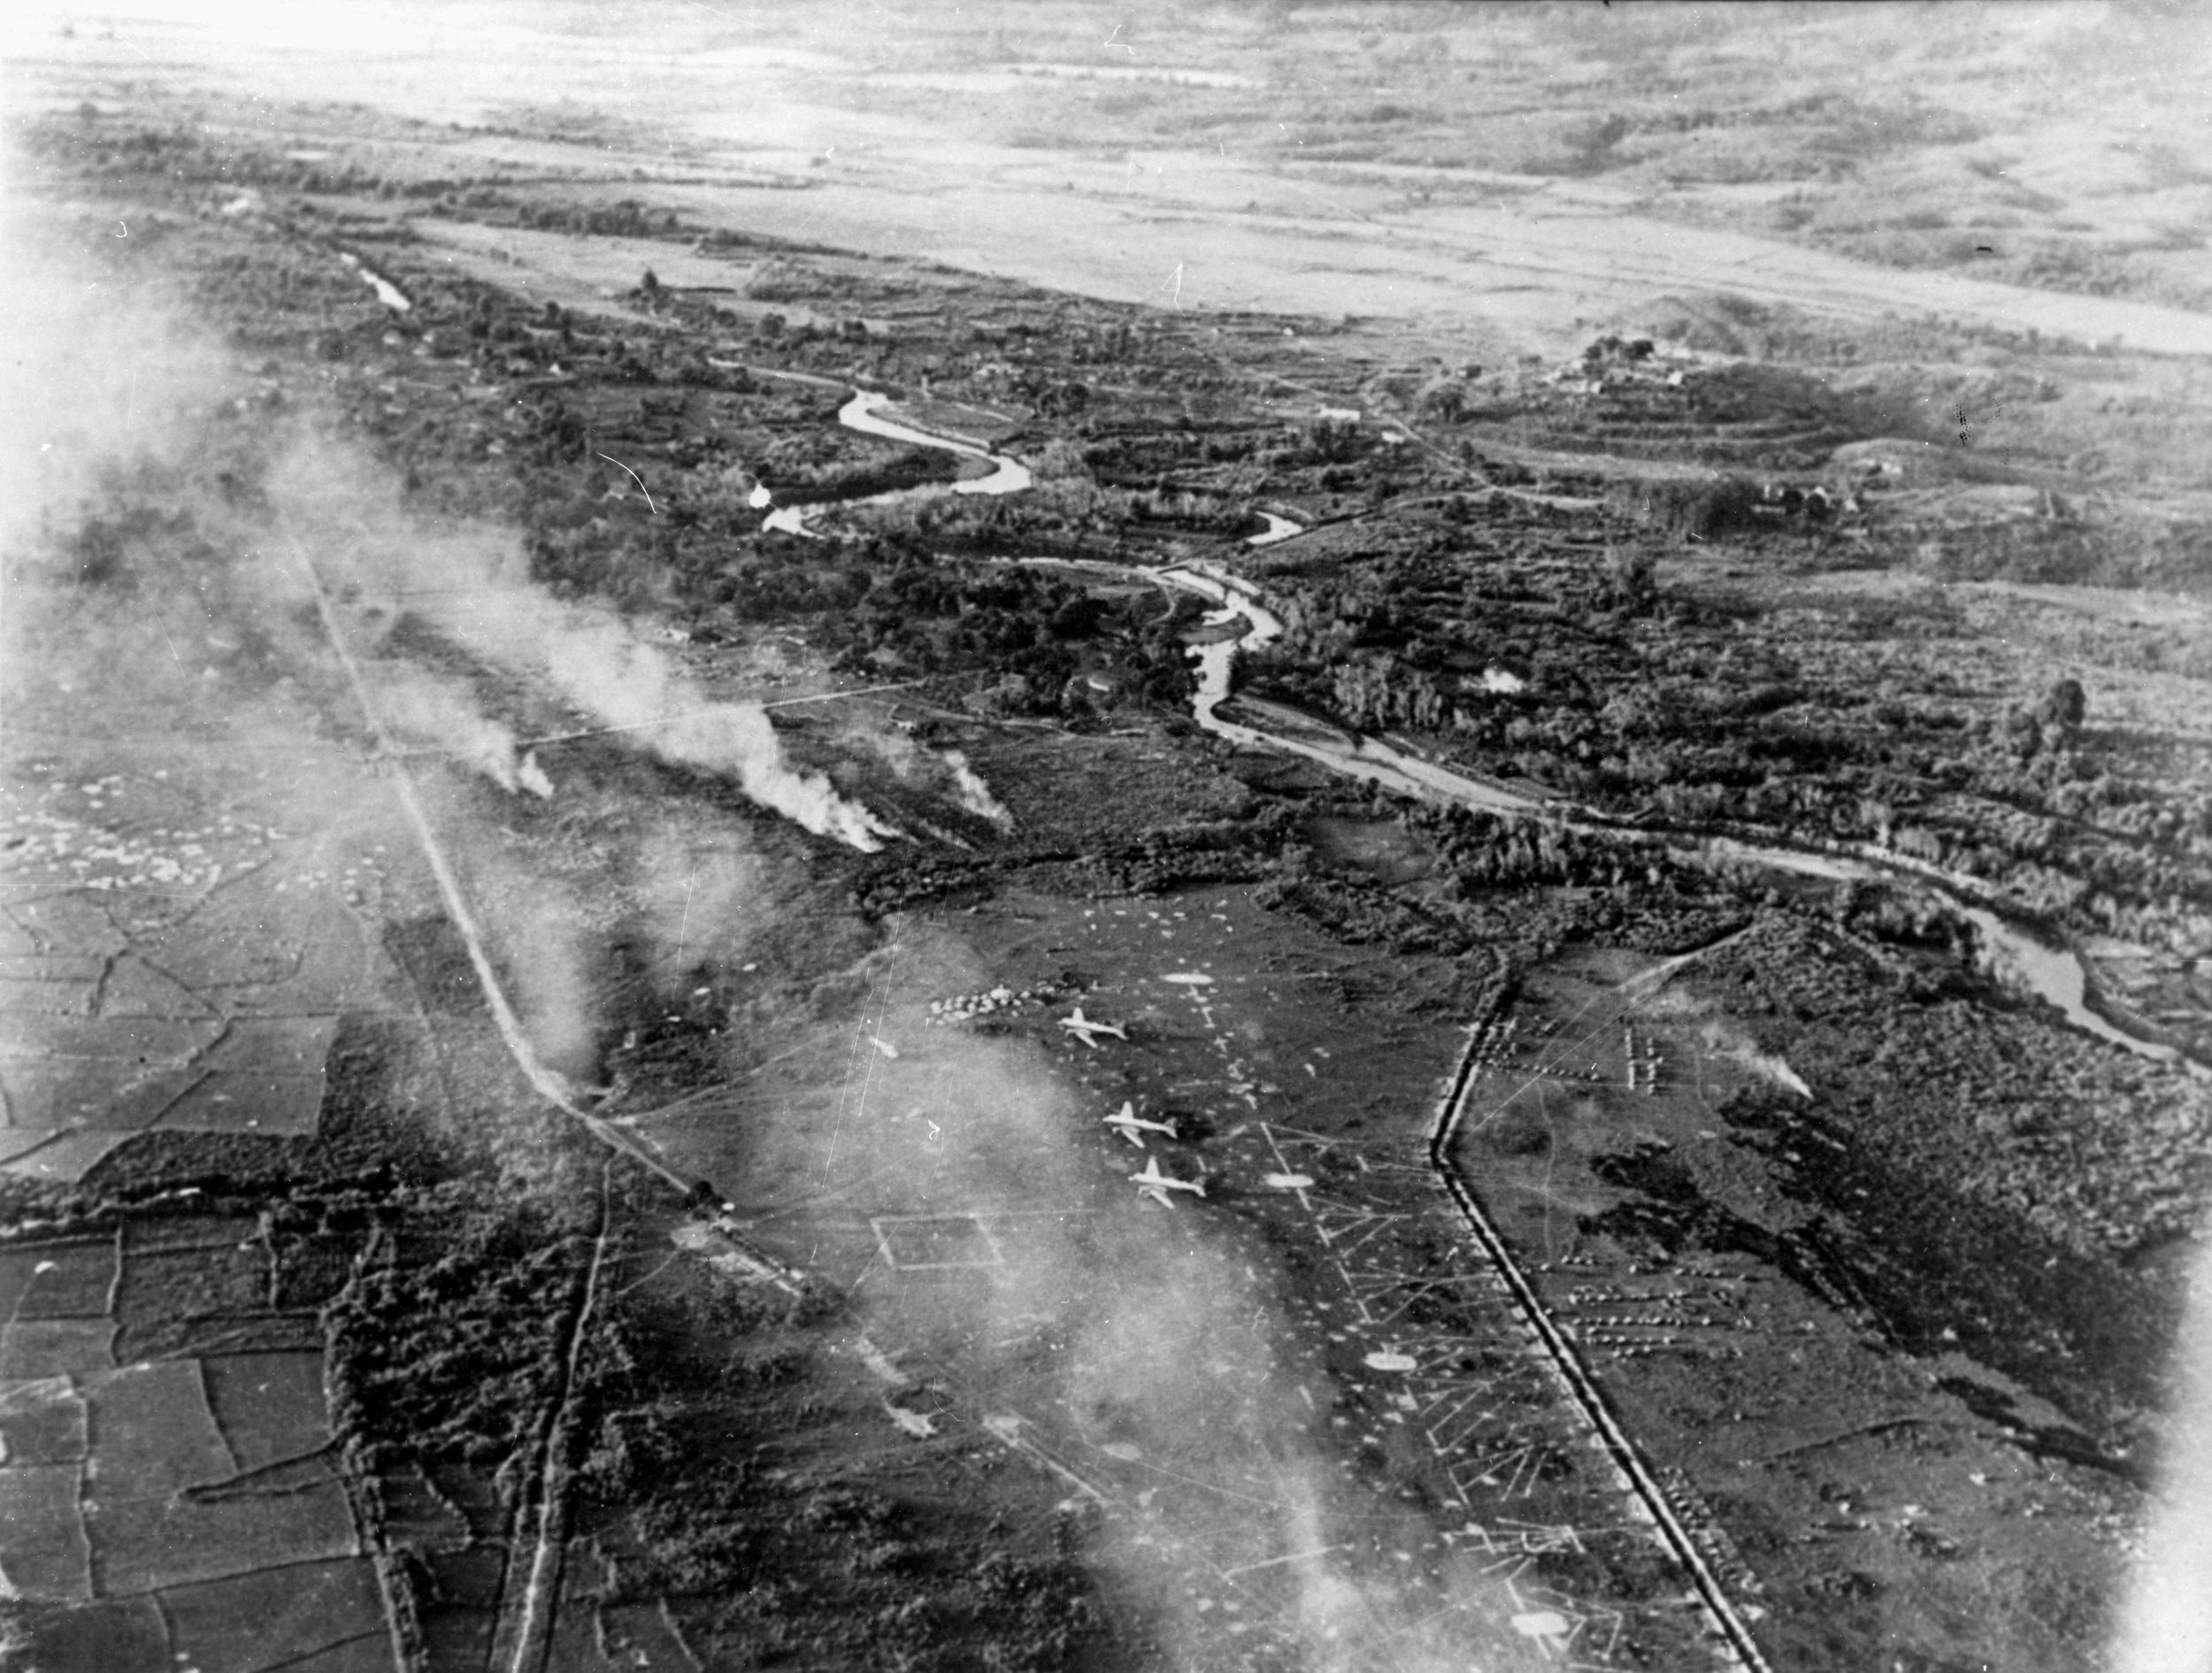 The smoke-shrouded airstrip at Dien Bien Phu was closed in late March 1954 after heavy Viet Minh shelling. 